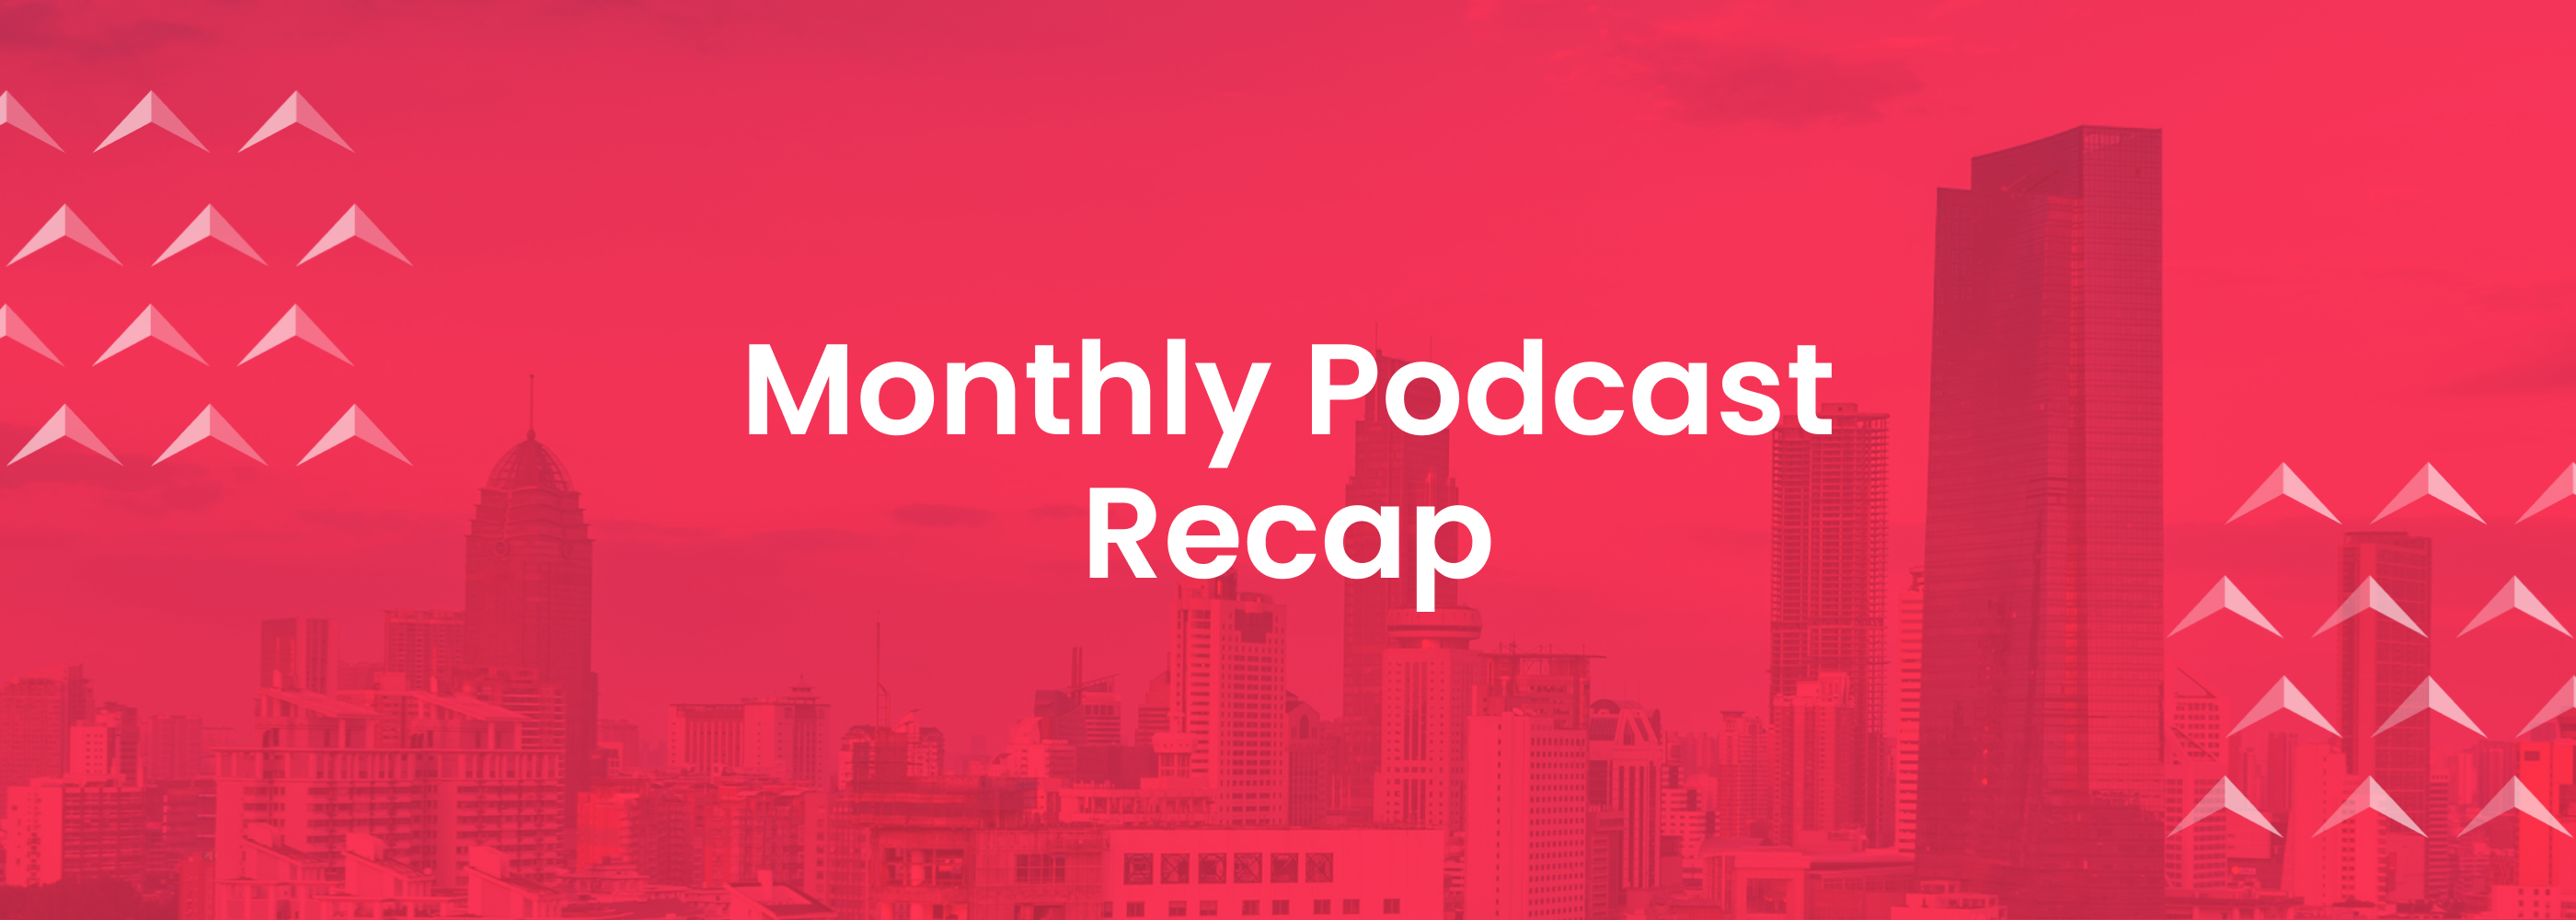 Monthly Podcast Recap: Top Highlights from August 2021